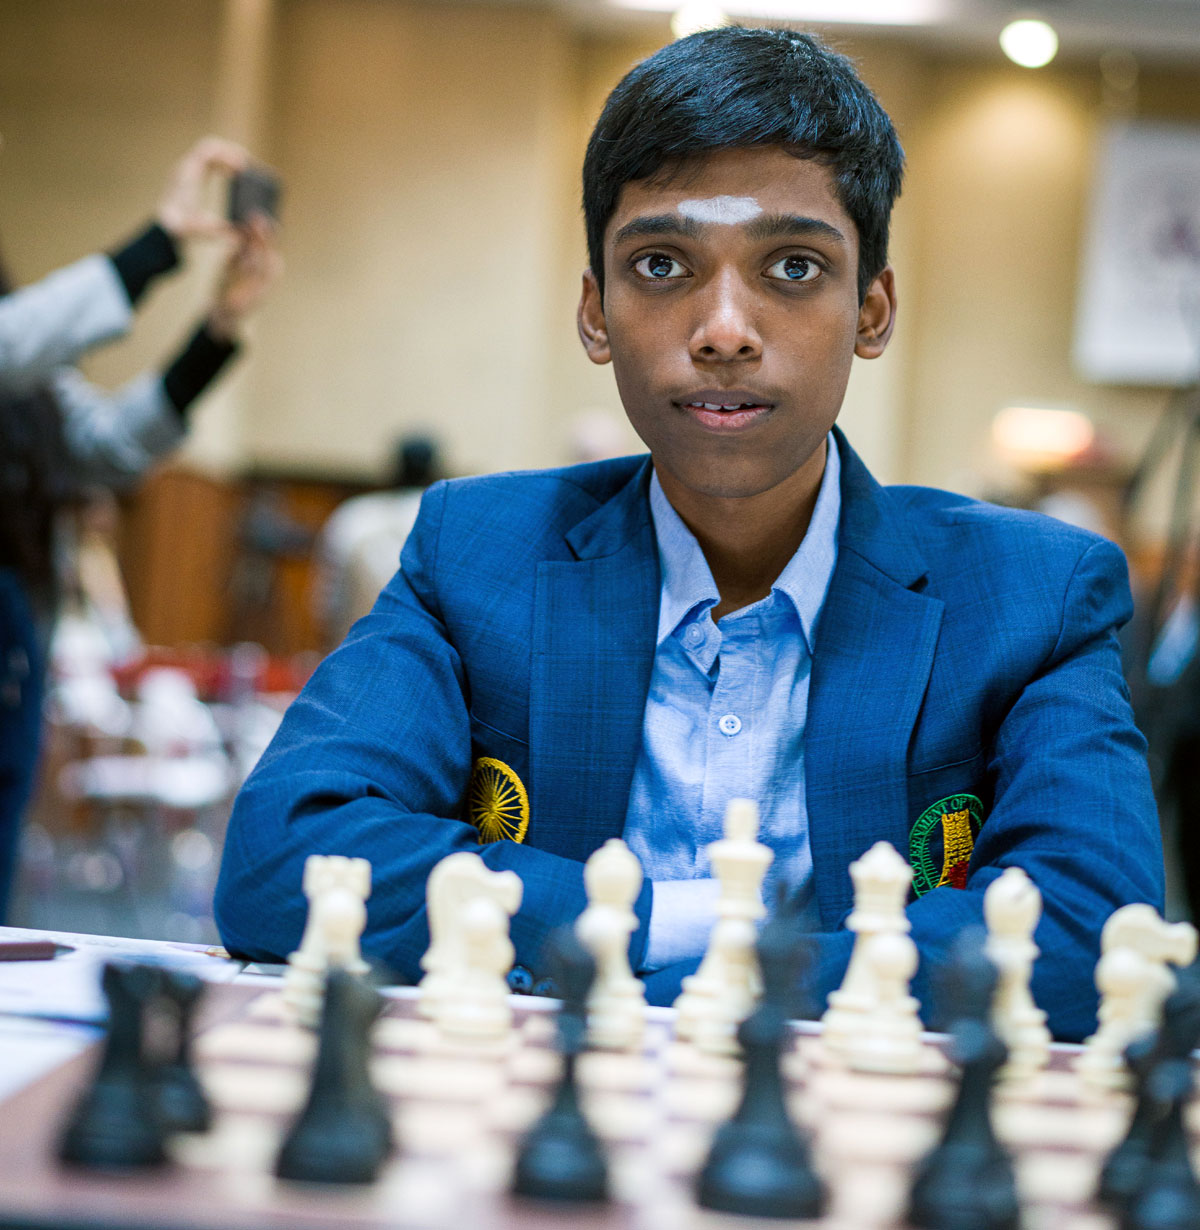 Narrow loss to R Praggnanandhaa in Chess World Cup quarters only a minor  bump in the road for Arjun Erigaisi